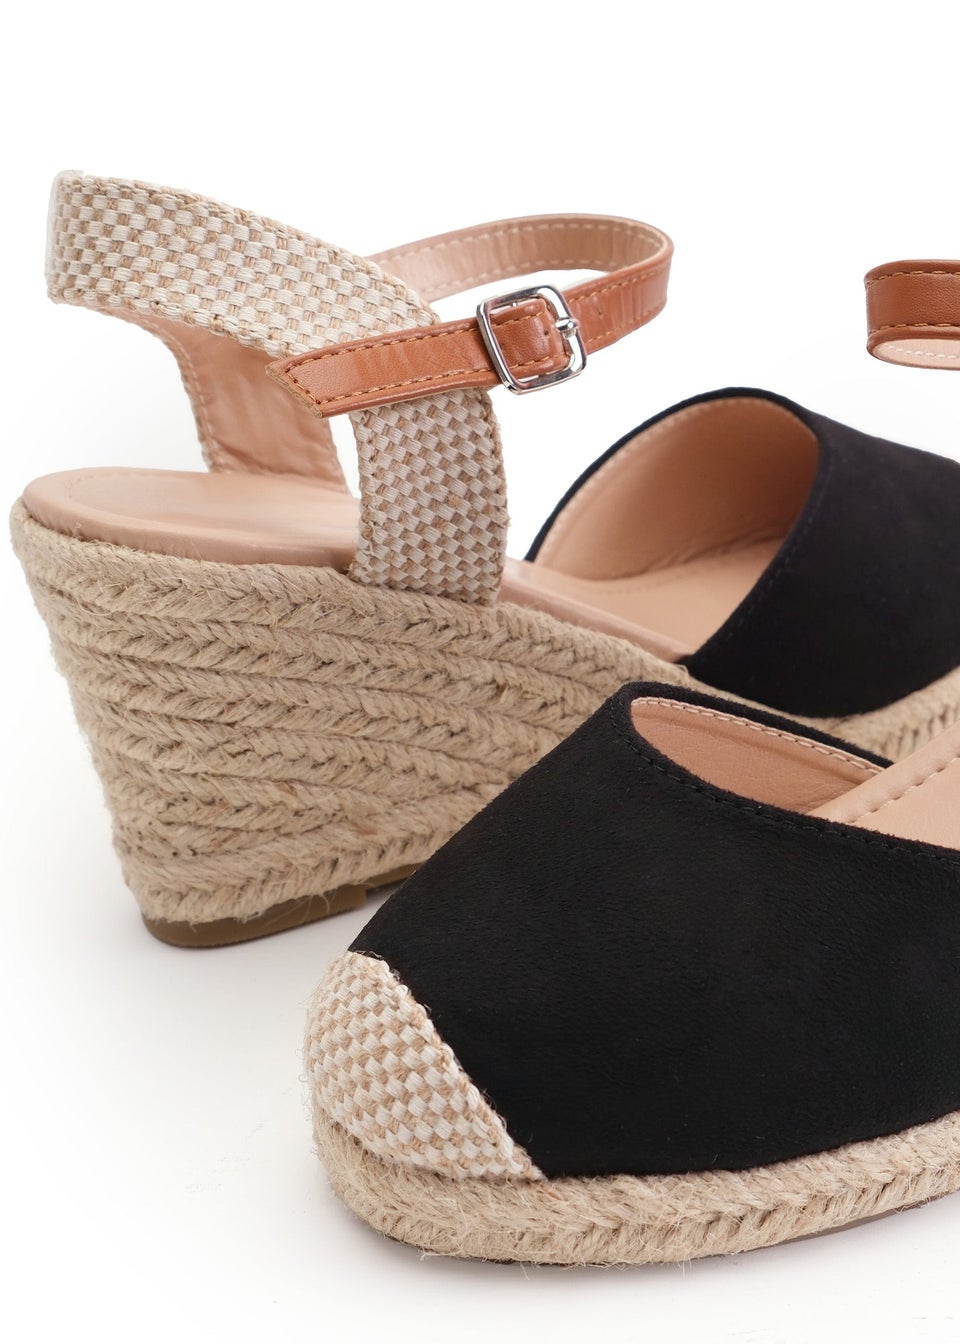 Where's That From Black Suede Blakely Low Wedge Espadrille Sandals